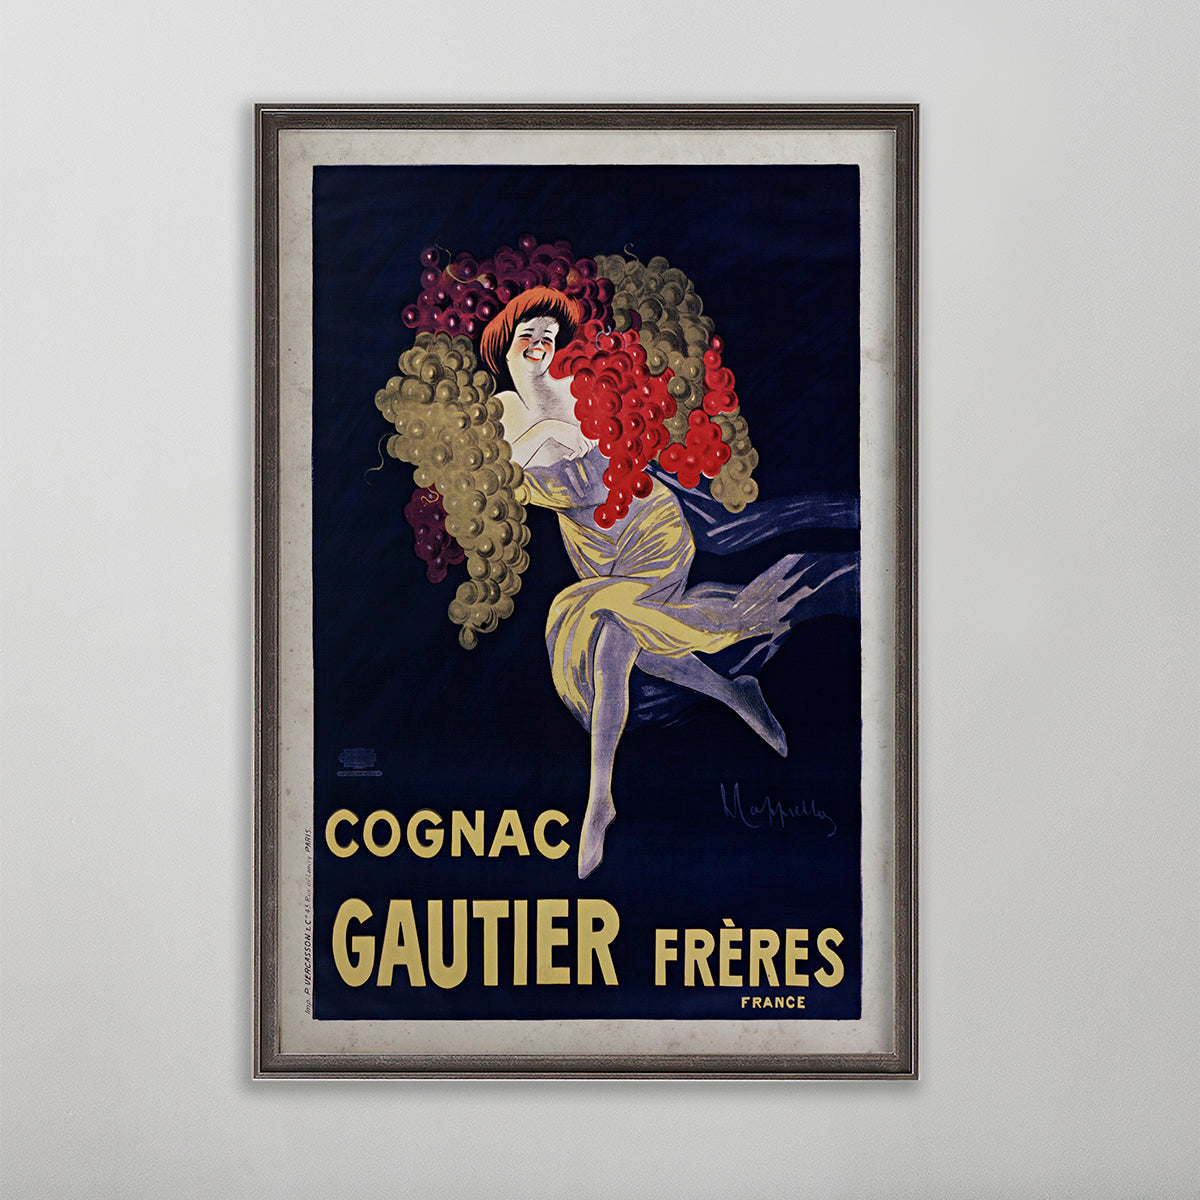 old poster advertisement art. cognac poster wall art by leonetto cappiello. Girl carrying grapes on a poster vintage art.